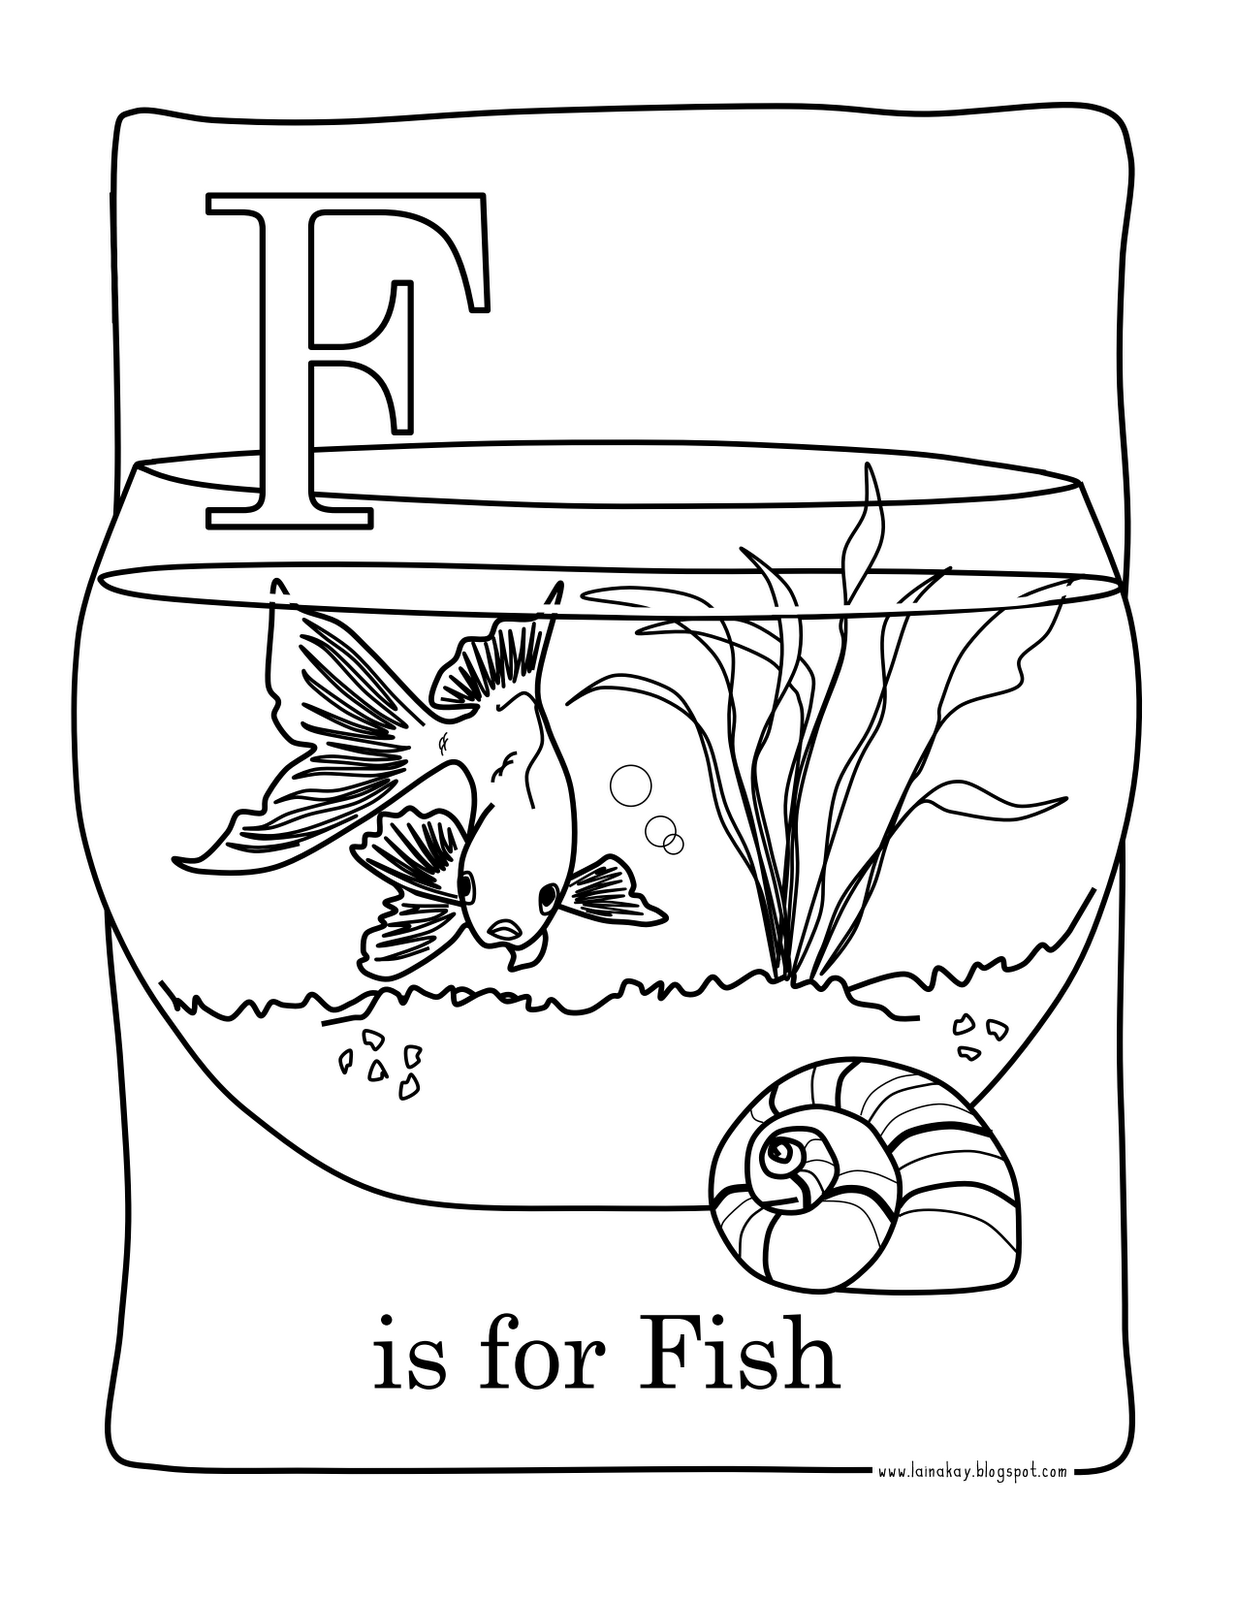 F is for Fish Coloring